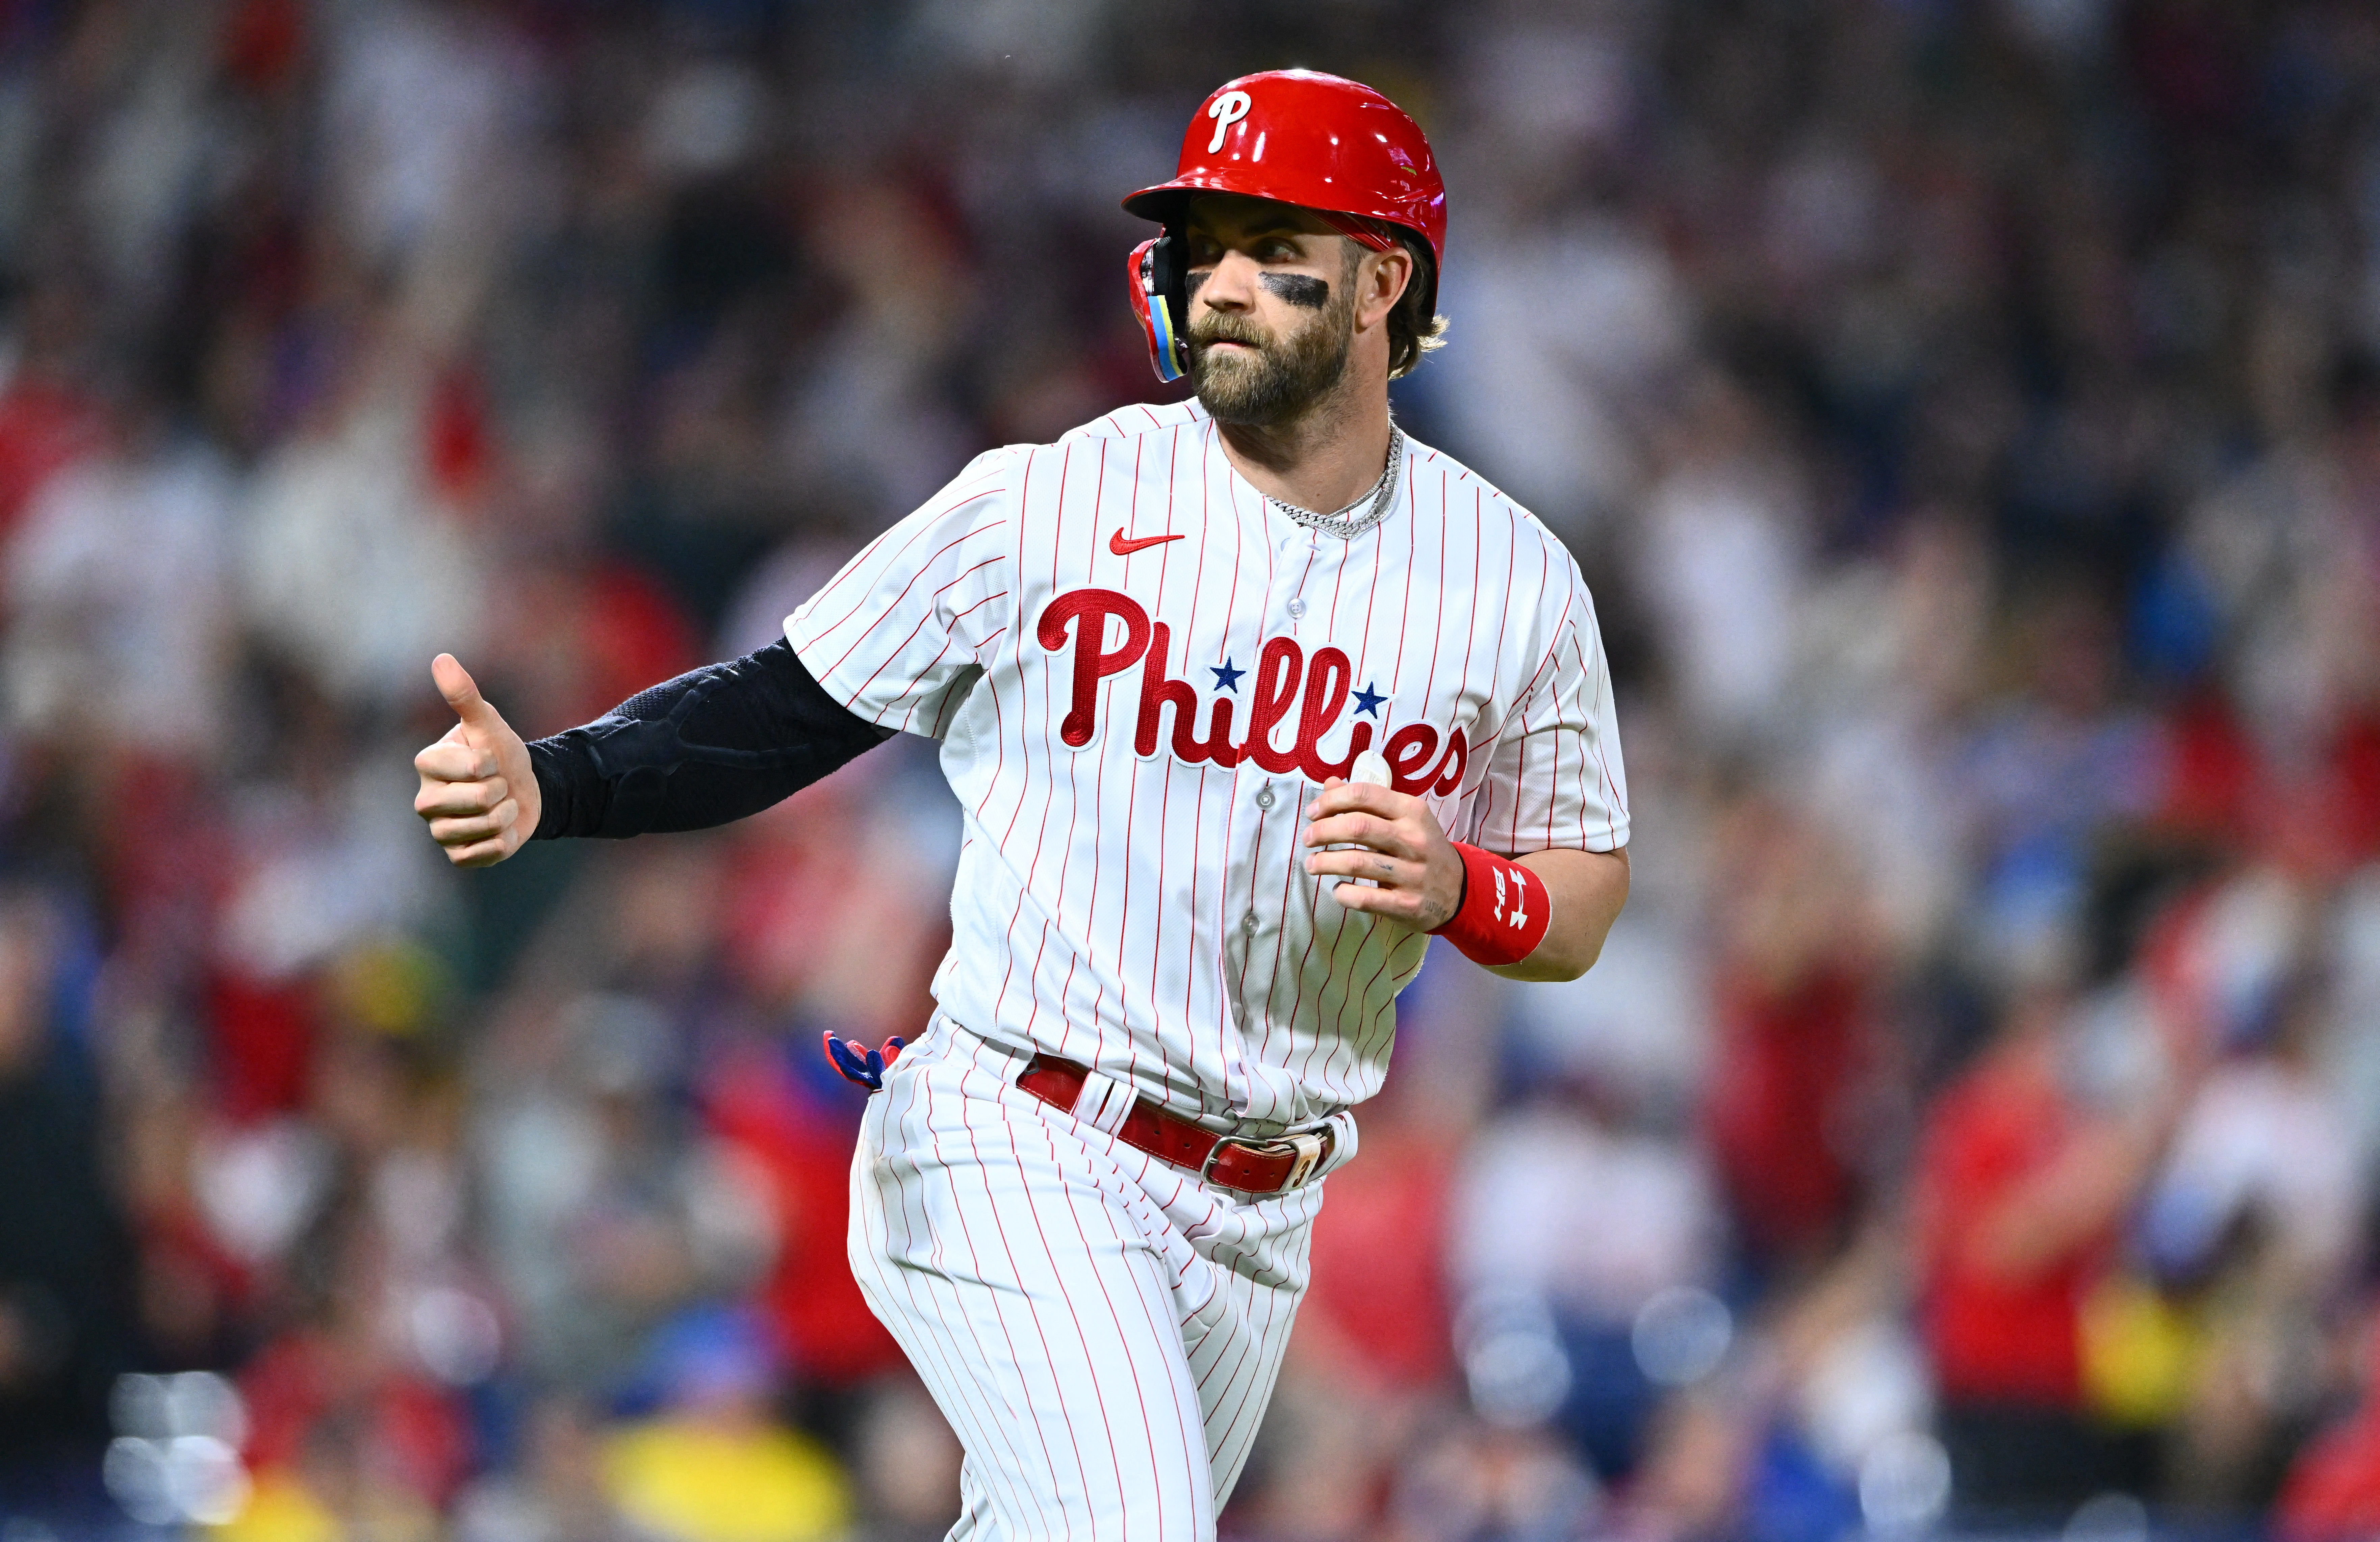 Phillies: Bailey Falter battling control, ABS system